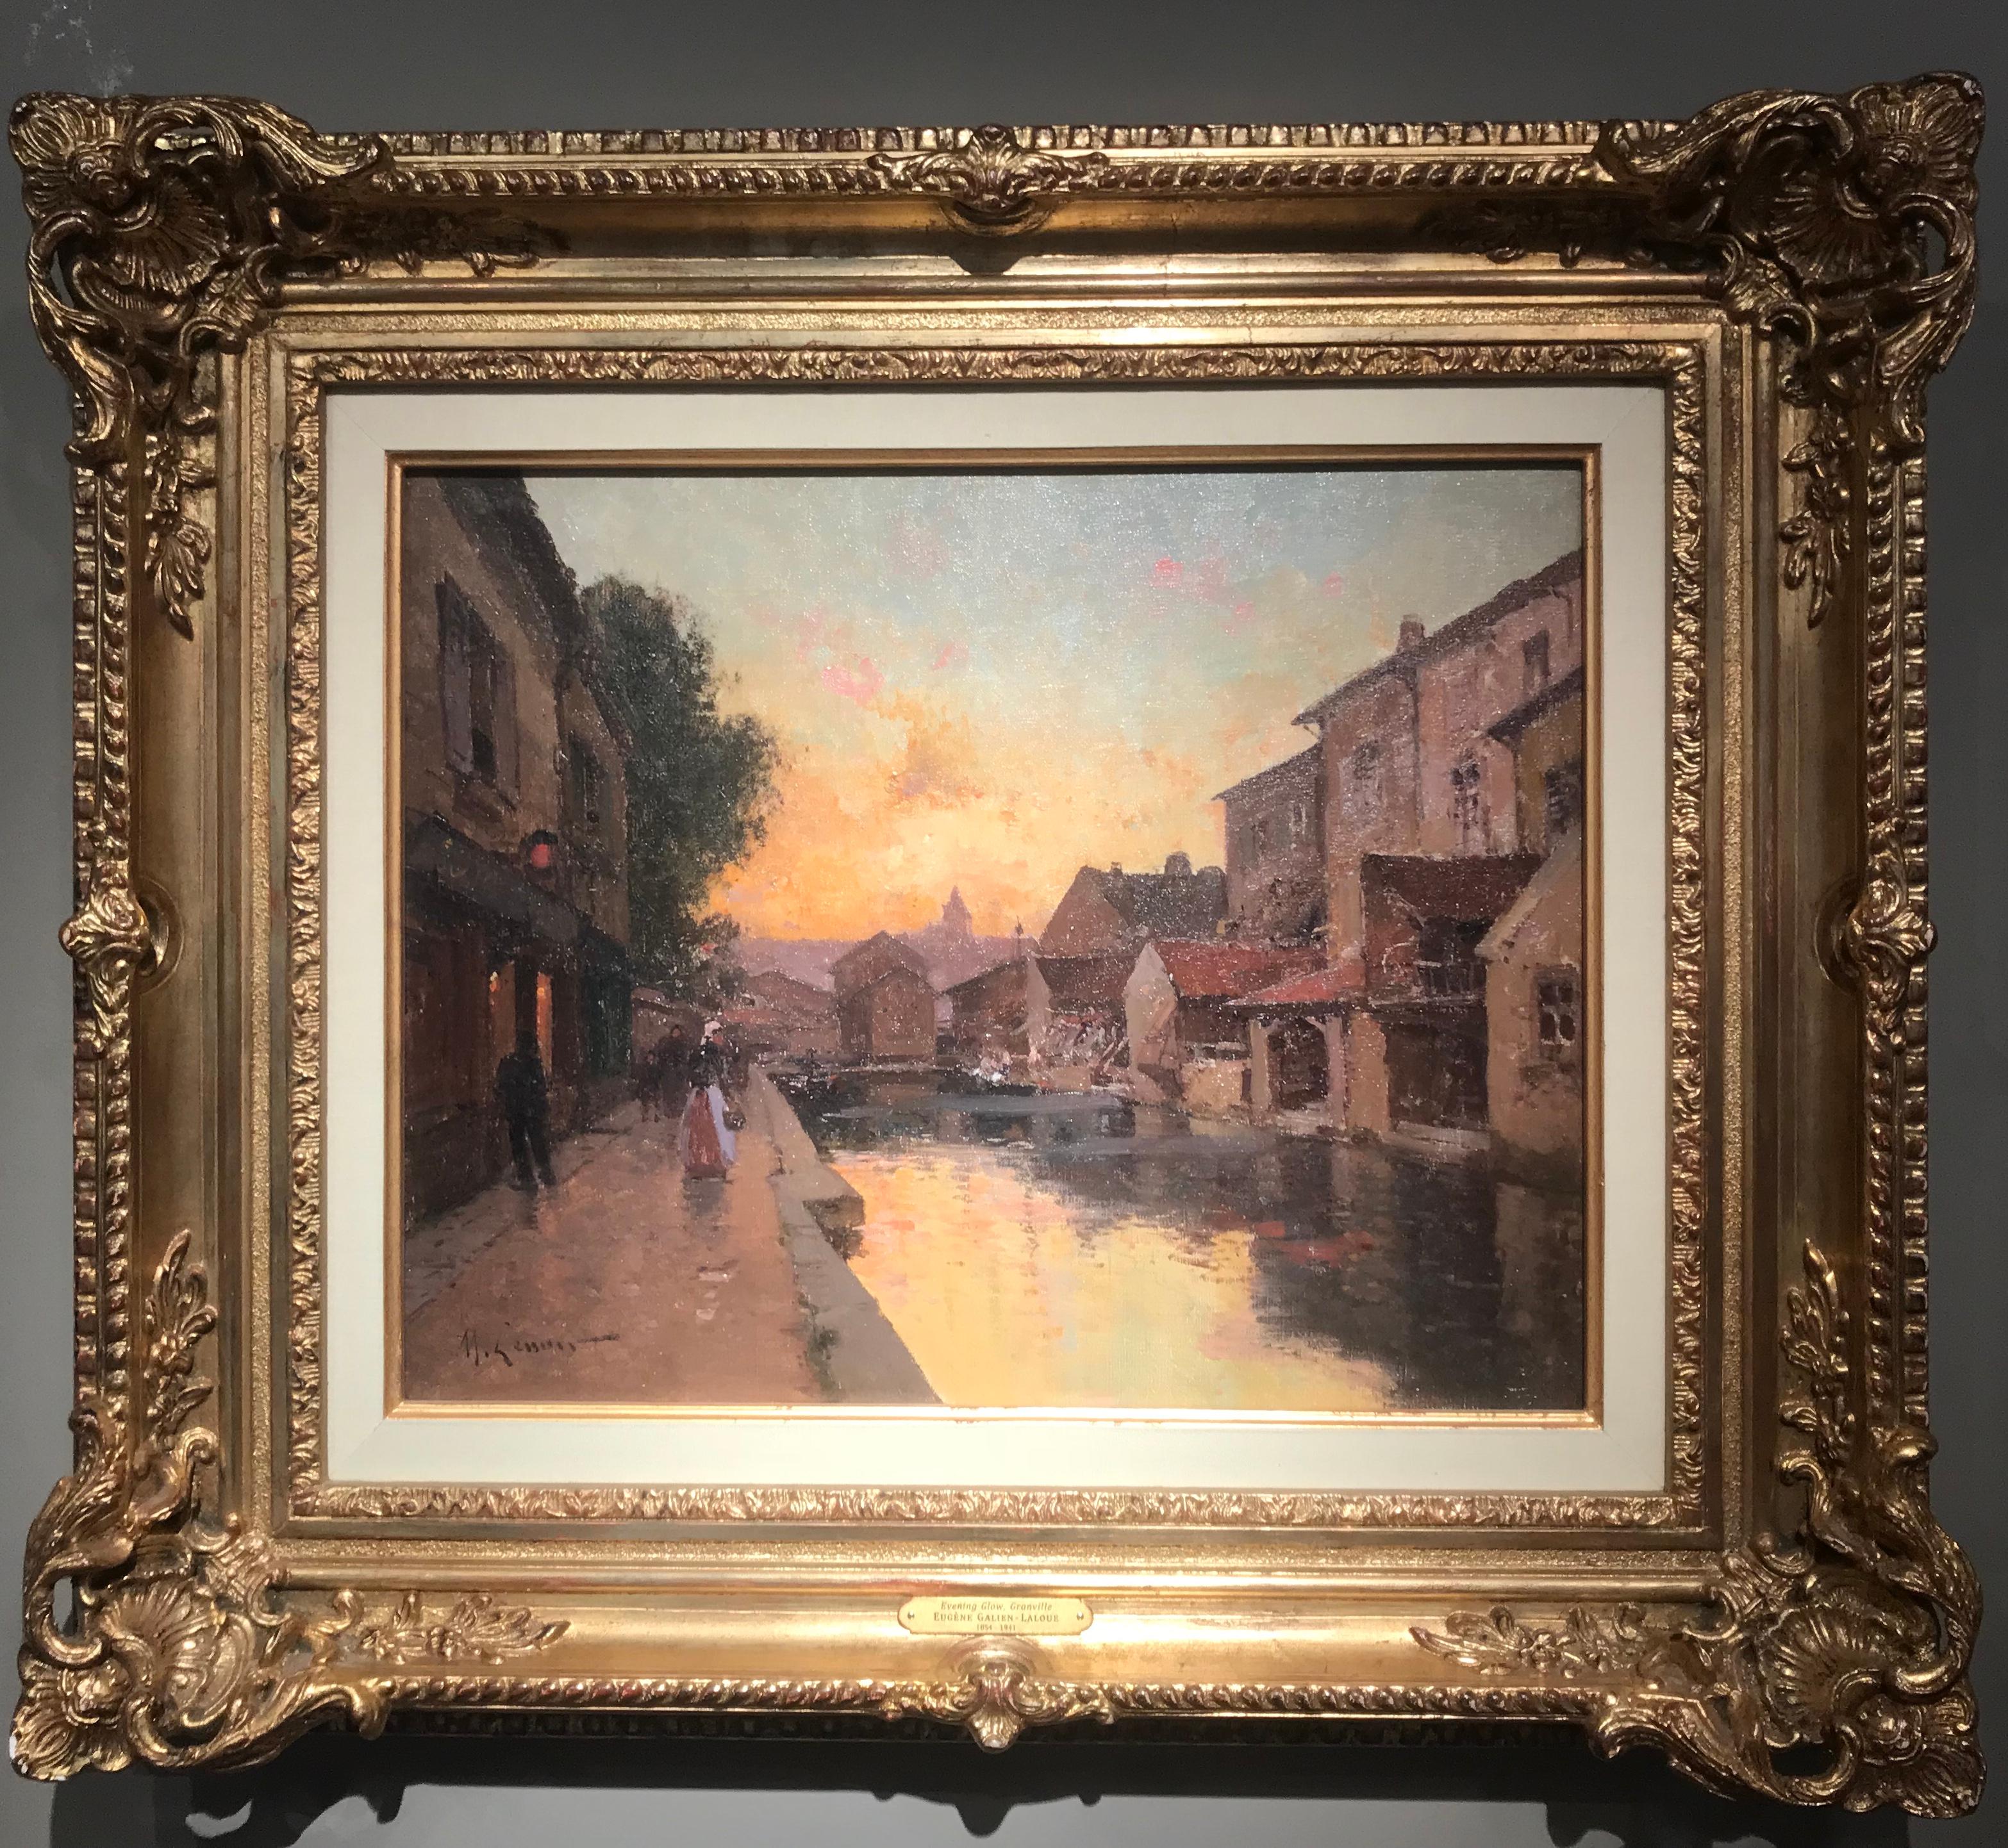 'Evening Glow' by Eugene Galien-Laloue is a Post-impressionist Parisian Street Scene - a painting filled with beautiful warm light and depicting the streets of Paris. Figures meander through sidewalk on a summer evening. 
Provenance: Private